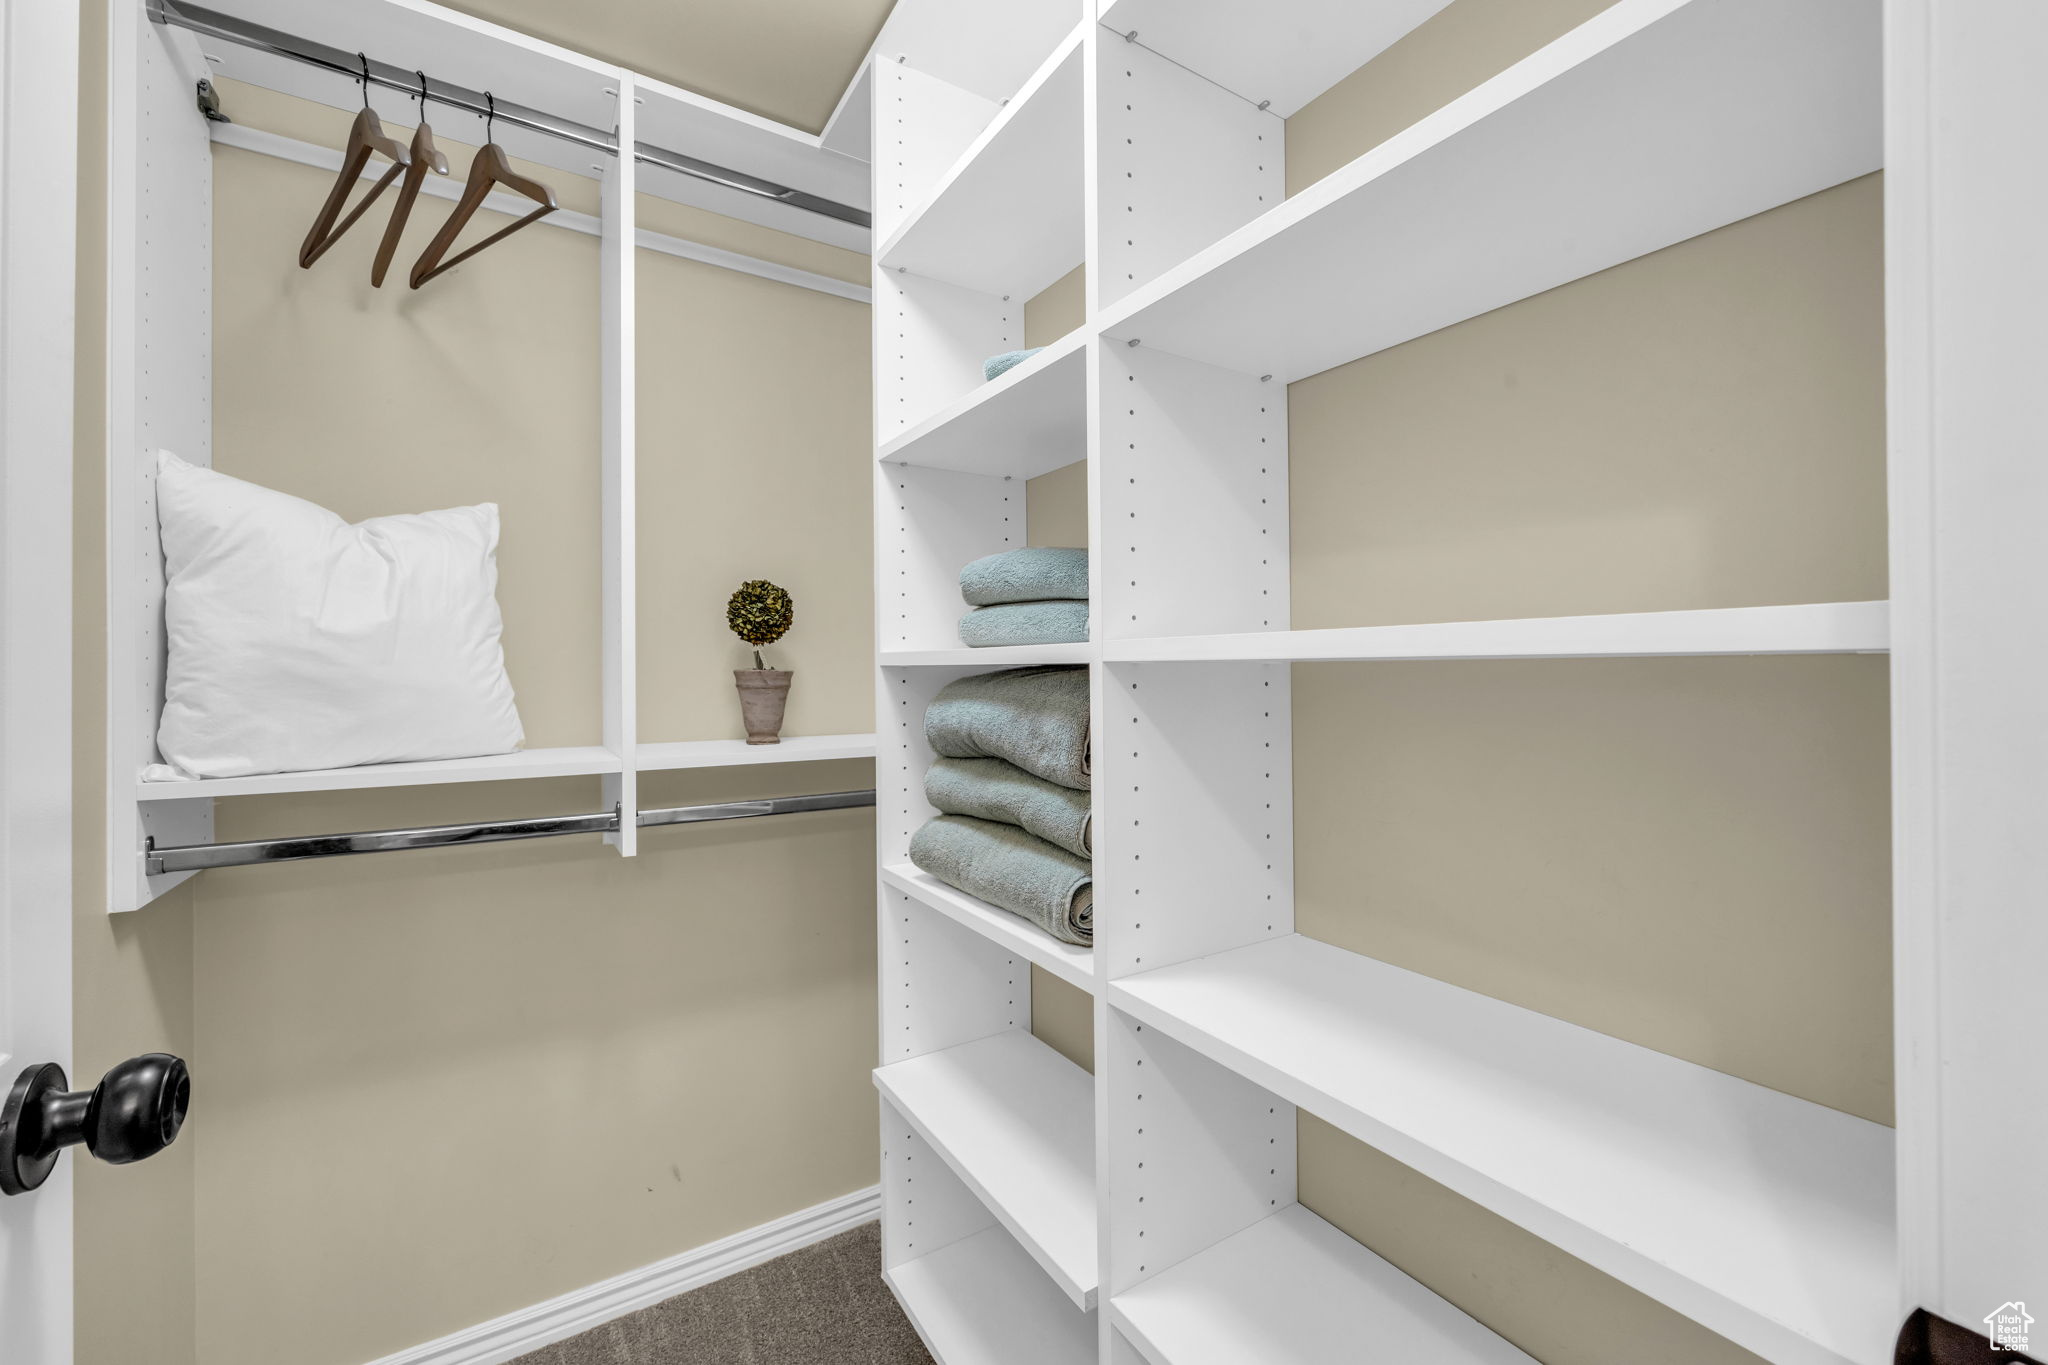 Walk in closet featuring full closet organizer shelves and hanging rods